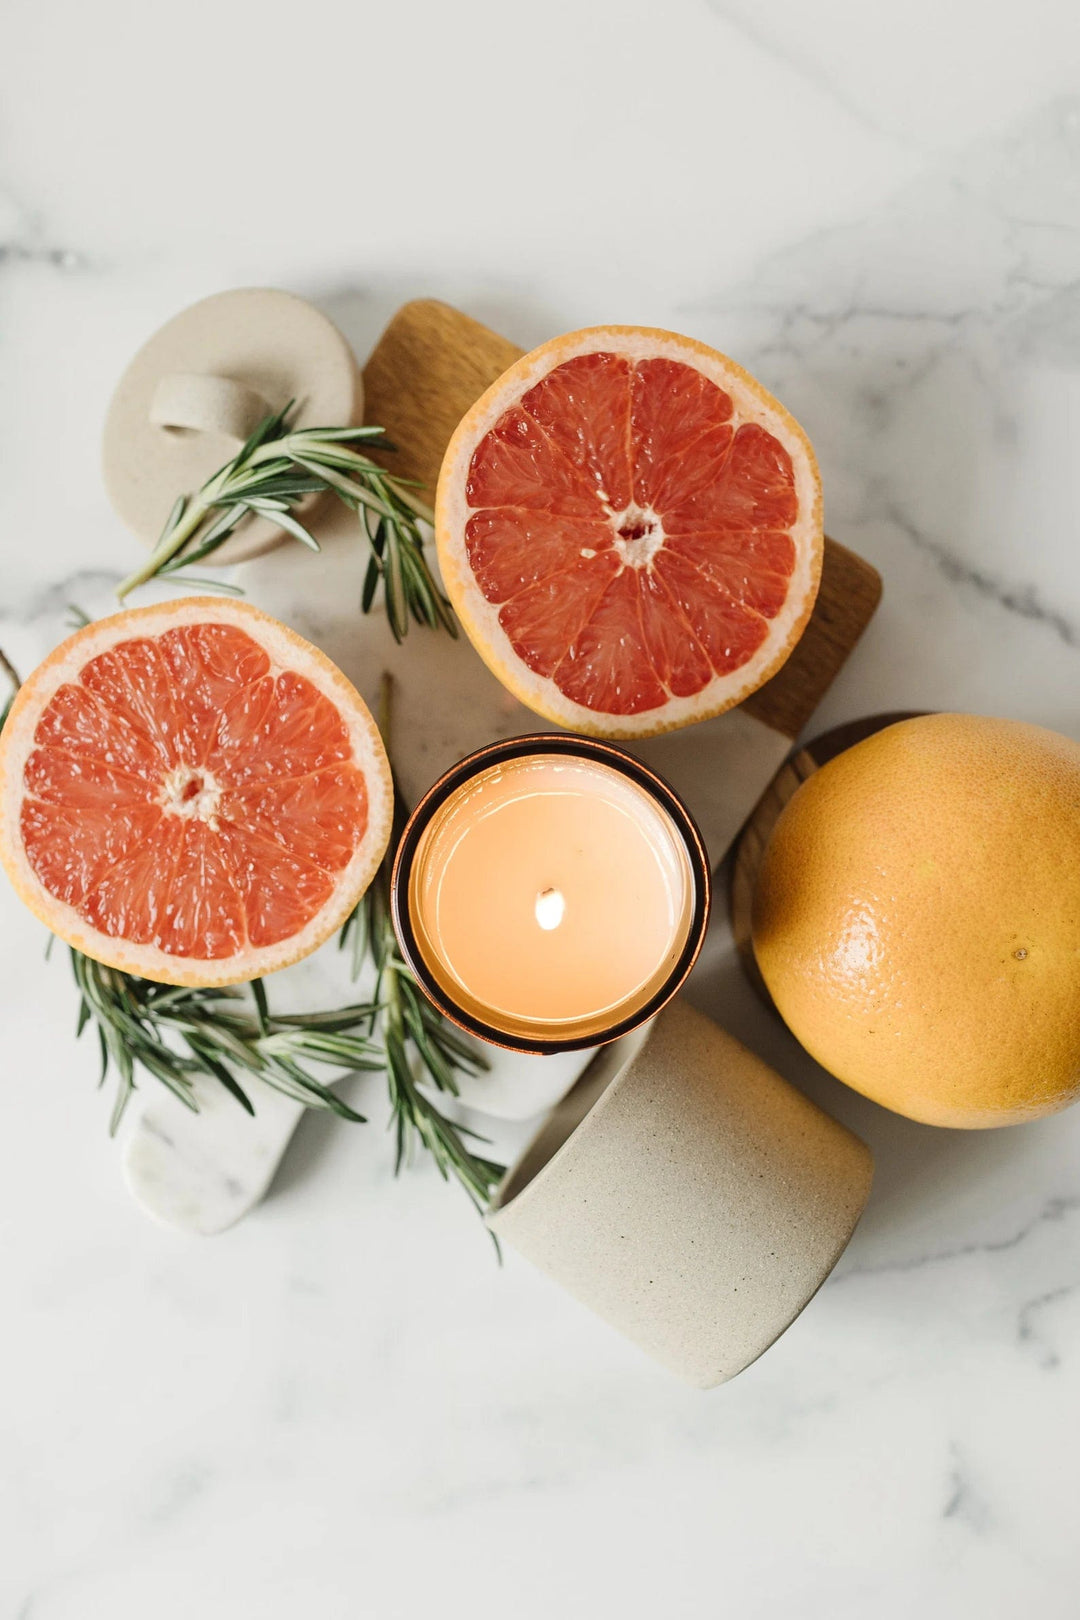 wax & wool Candle Rosemary Grapefruit - 9 oz Pure Soy Wax Candle